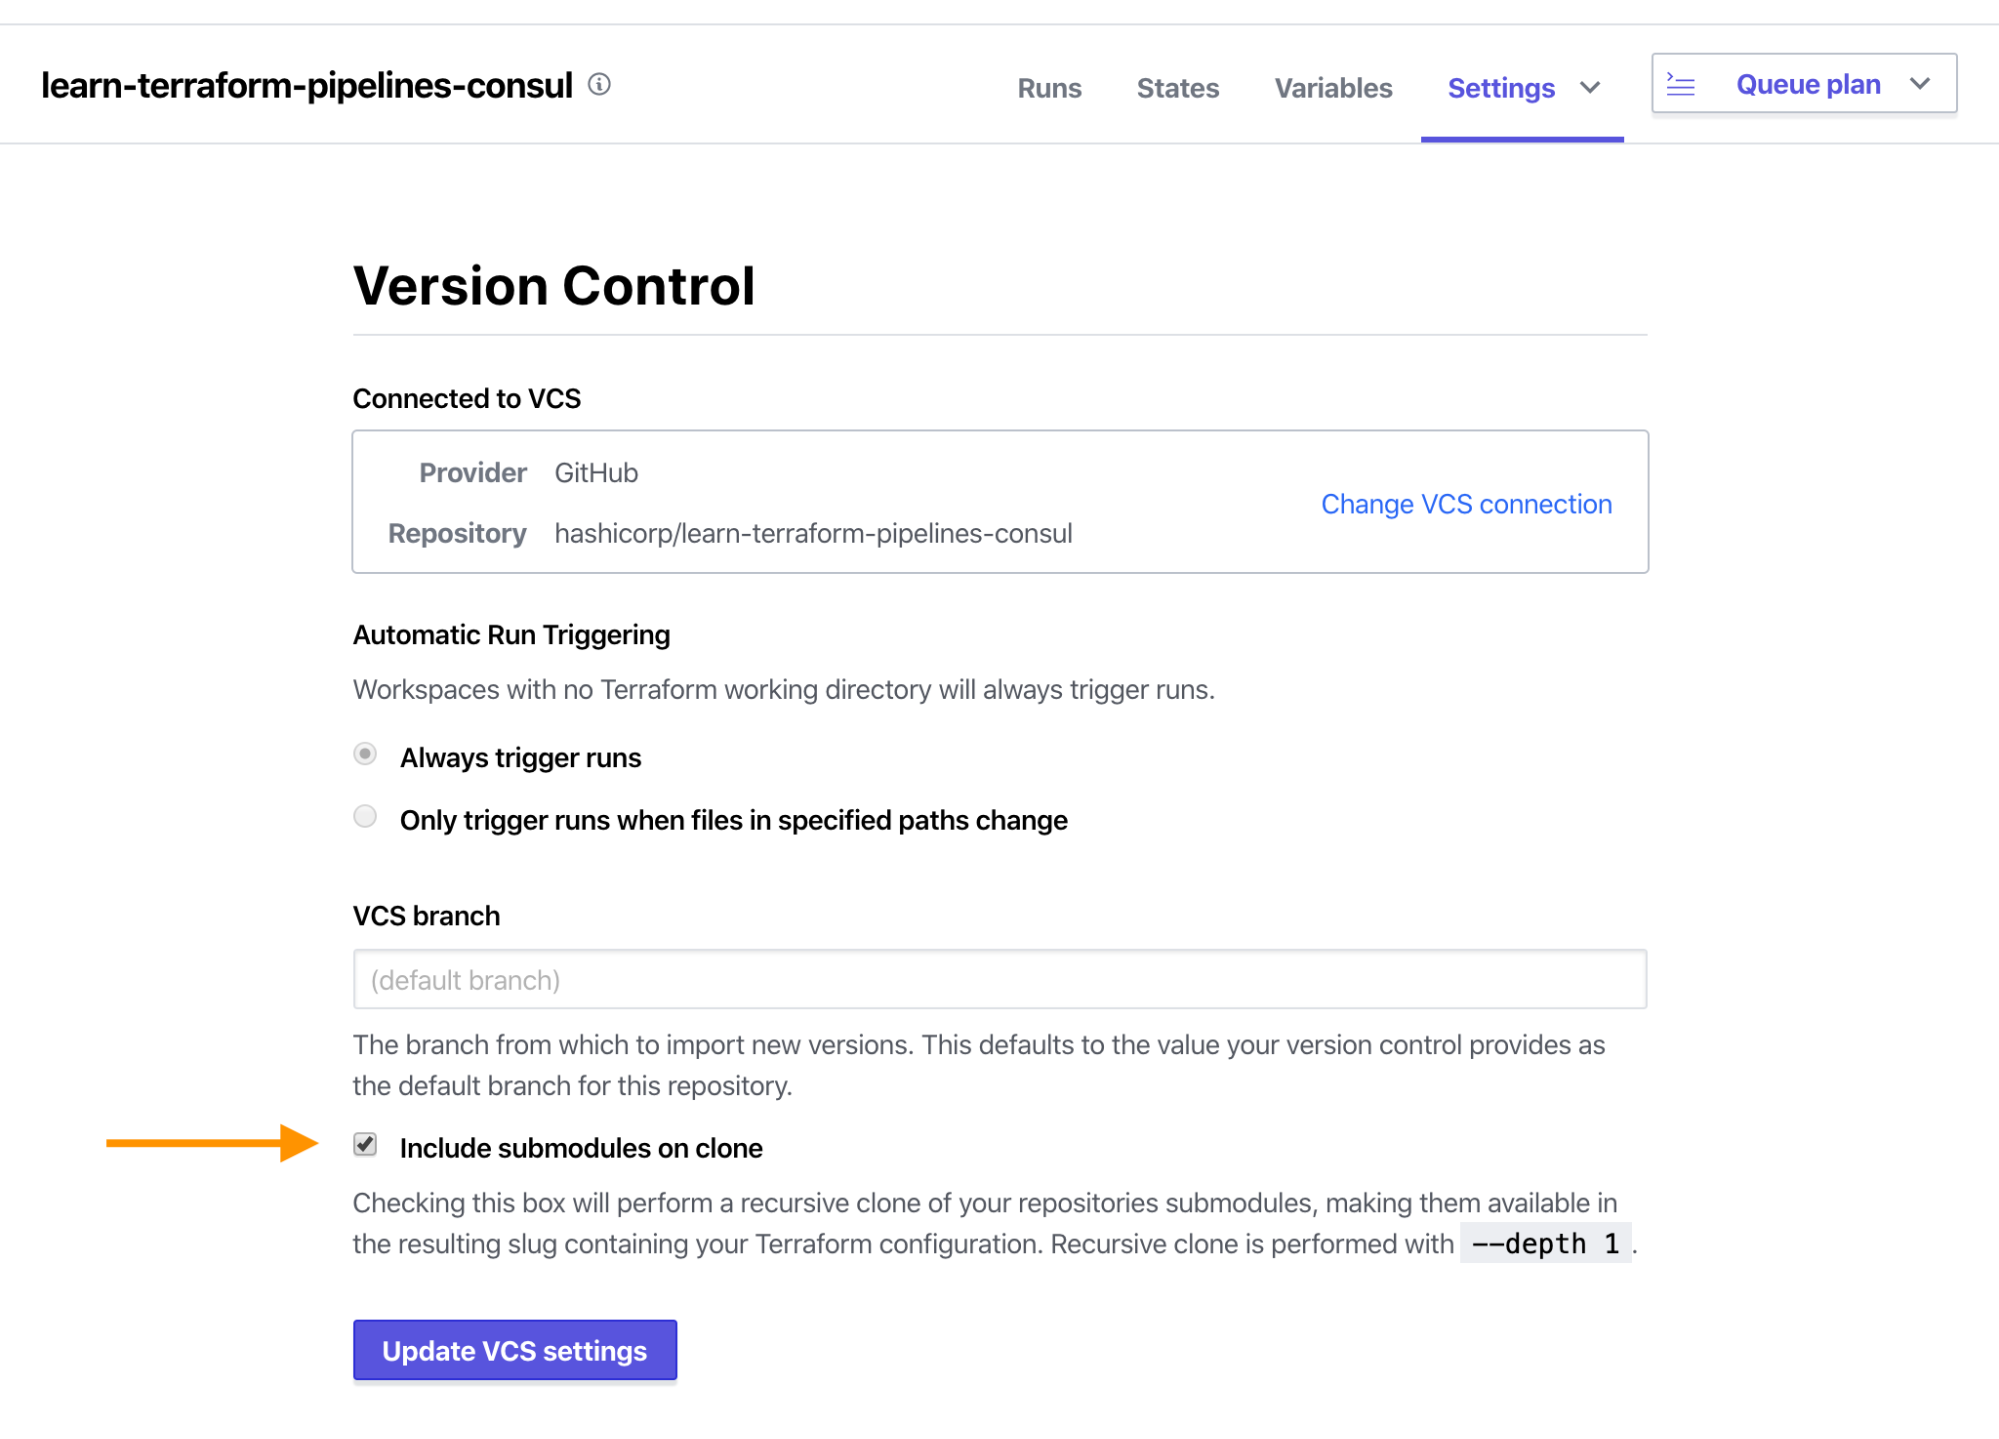 Terraform Cloud Kubernetes Workspace fully configured version control version. Include submodules on clone option has been ticked.